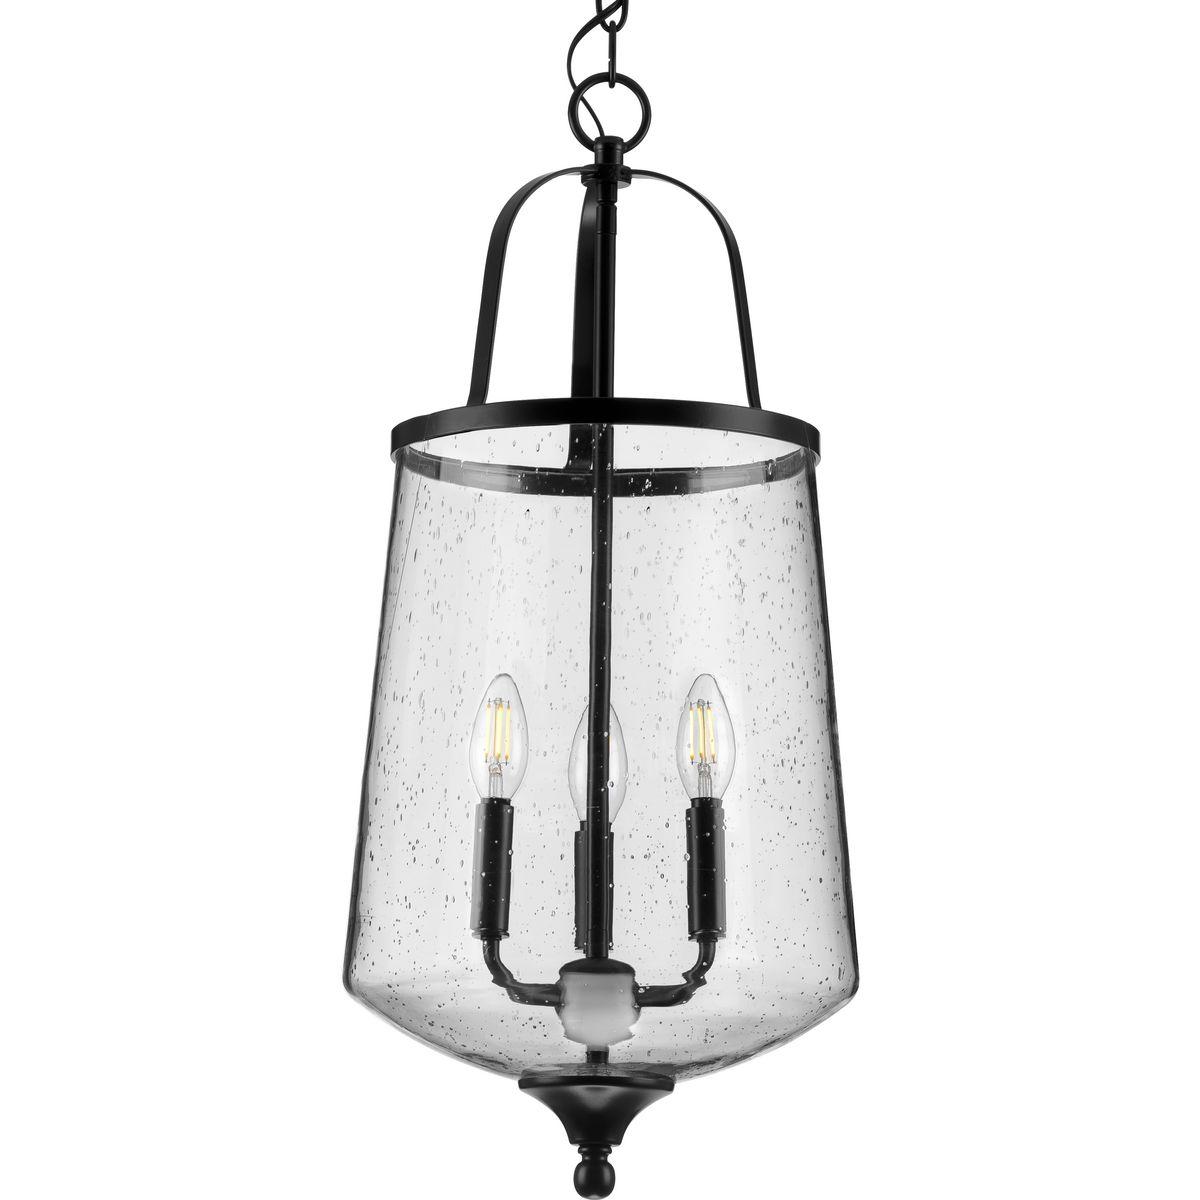 Hubbell P500237-031 Create a simply beautiful lighting experience in the heart of your home with the understated elegance of the Passage Collection. Smooth, thin metal arms reach down to hold a metal rim topping a simple, clear seeded glass shade that provides a dash of unex